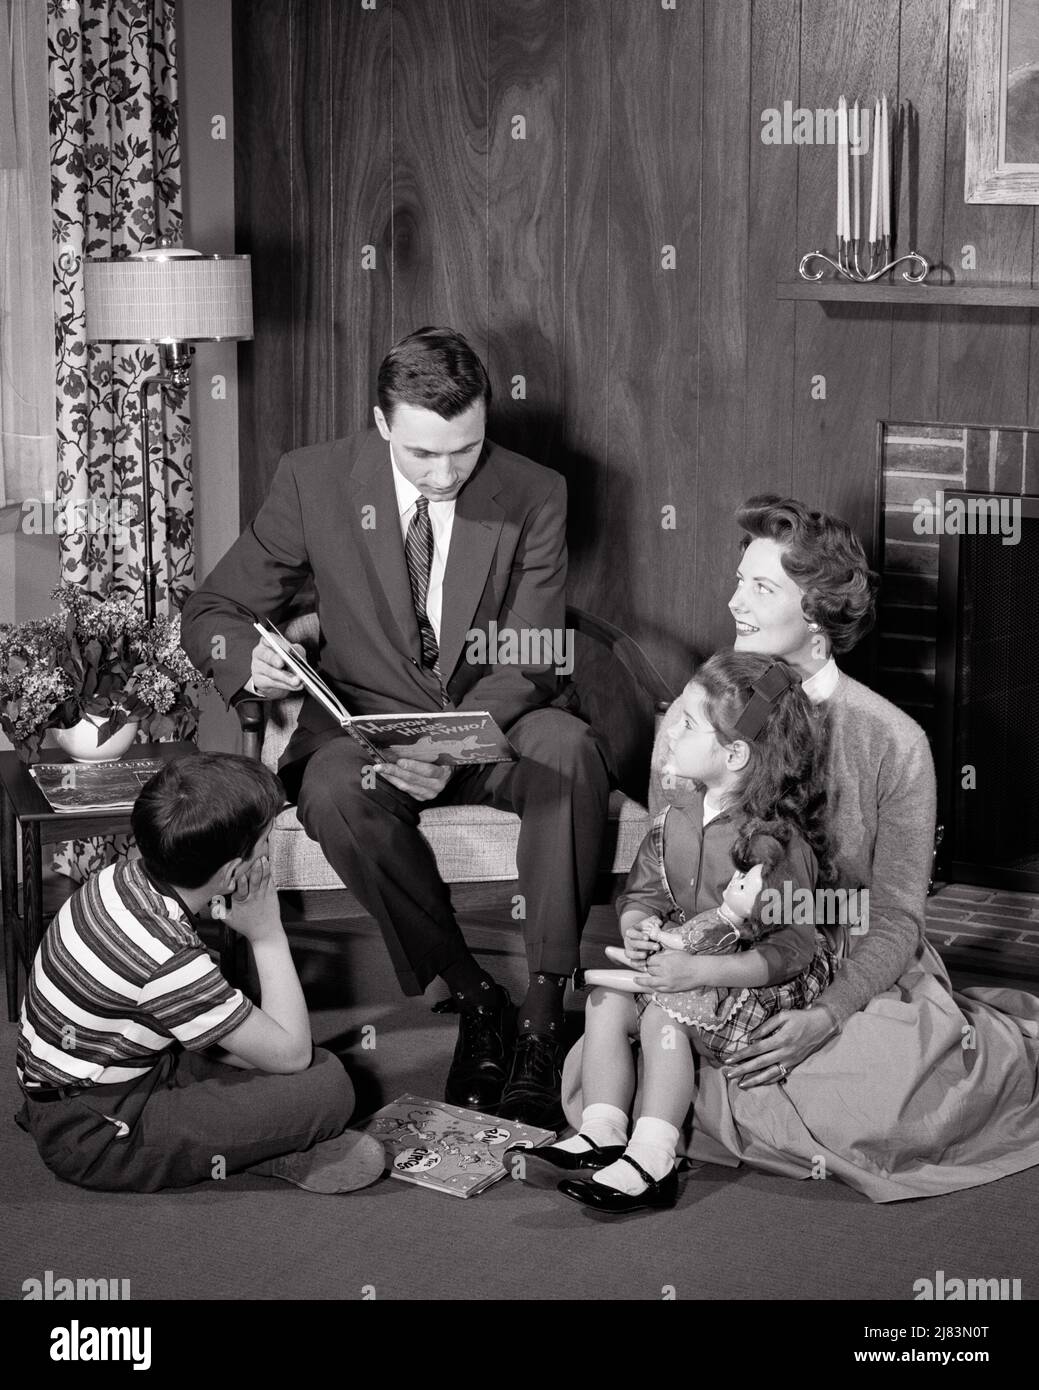 1950s FATHER SITTING IN CHAIR READING A DR SUESS STORY HORTON HEARS A WHO TO HIS SON DAUGHTER AND WIFE ALL SITTING ON FLOOR - j5013 HAR001 HARS INDOORS FLOOR NOSTALGIC PAIR 4 SUBURBAN MOTHERS OLD TIME NOSTALGIA BROTHER READ OLD FASHION SISTER JUVENILE STYLE COMMUNICATION TEAMWORK INFORMATION SONS FAMILIES JOY LIFESTYLE SATISFACTION FEMALES MARRIED BROTHERS SPOUSE HUSBANDS HOME LIFE COPY SPACE FRIENDSHIP HALF-LENGTH LADIES DAUGHTERS PERSONS MALES SIBLINGS SISTERS FATHERS B&W PARTNER SUIT AND TIE HAPPINESS HIS LIVING ROOM AND DADS DR KNOWLEDGE SIBLING WHO CONNECTION IMAGINATION GROWTH JUVENILES Stock Photo